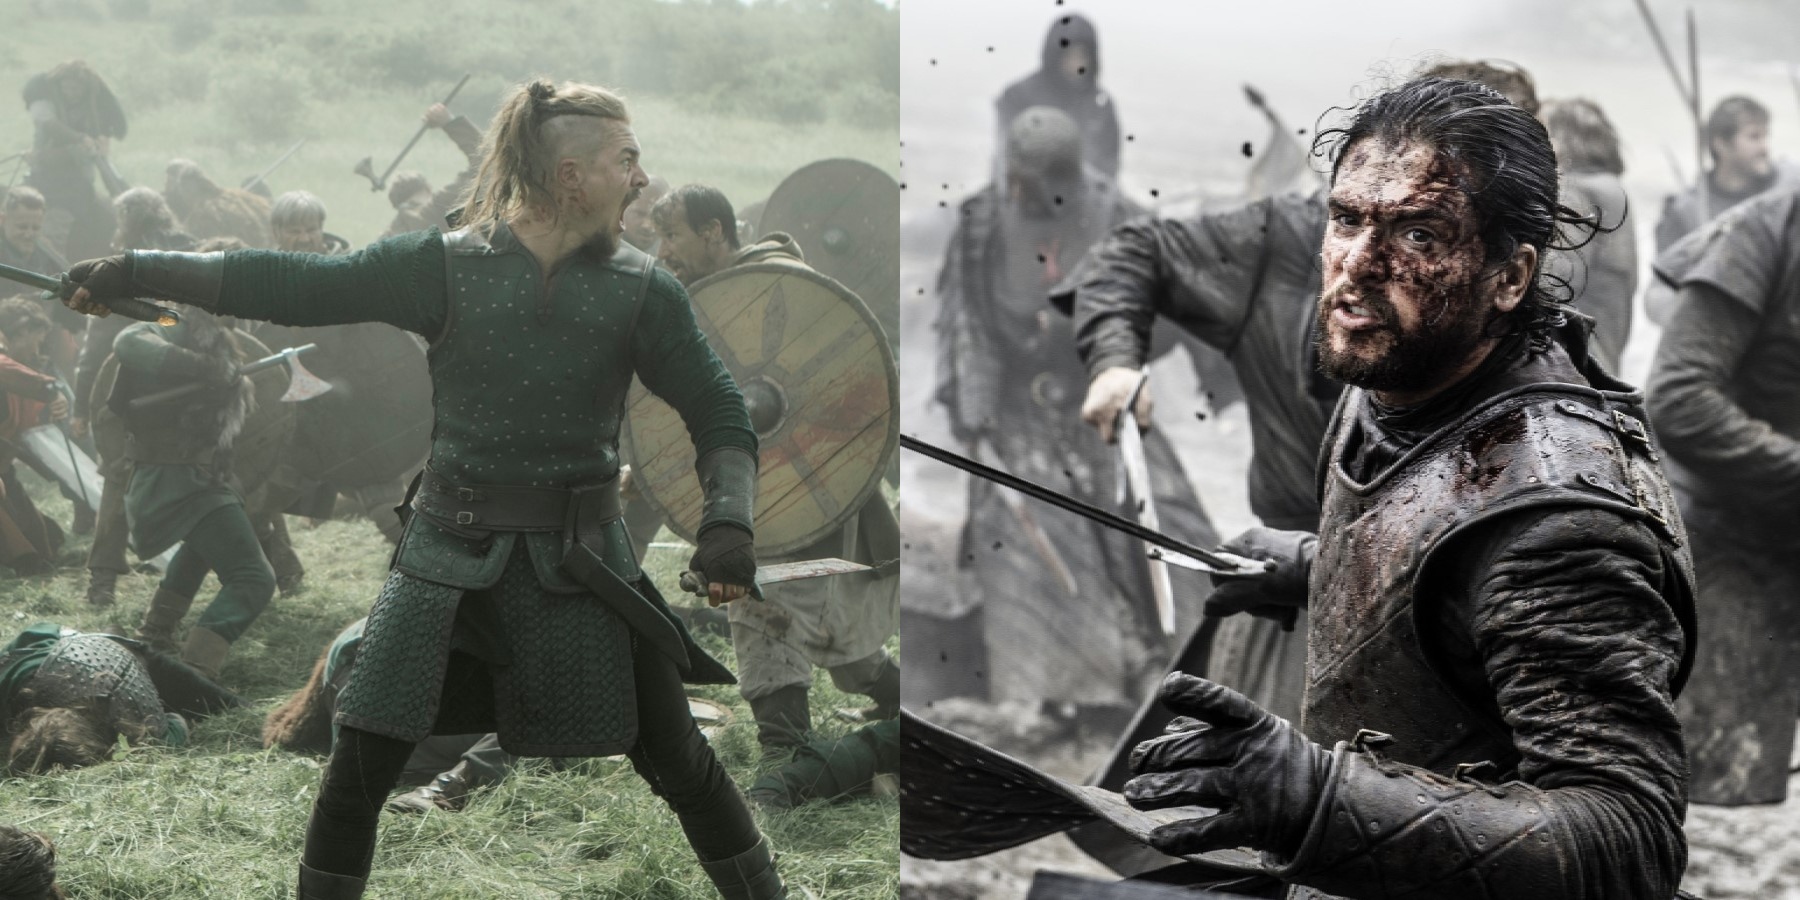 The Last Kingdom' Is 'Game of Thrones' Without Dragons